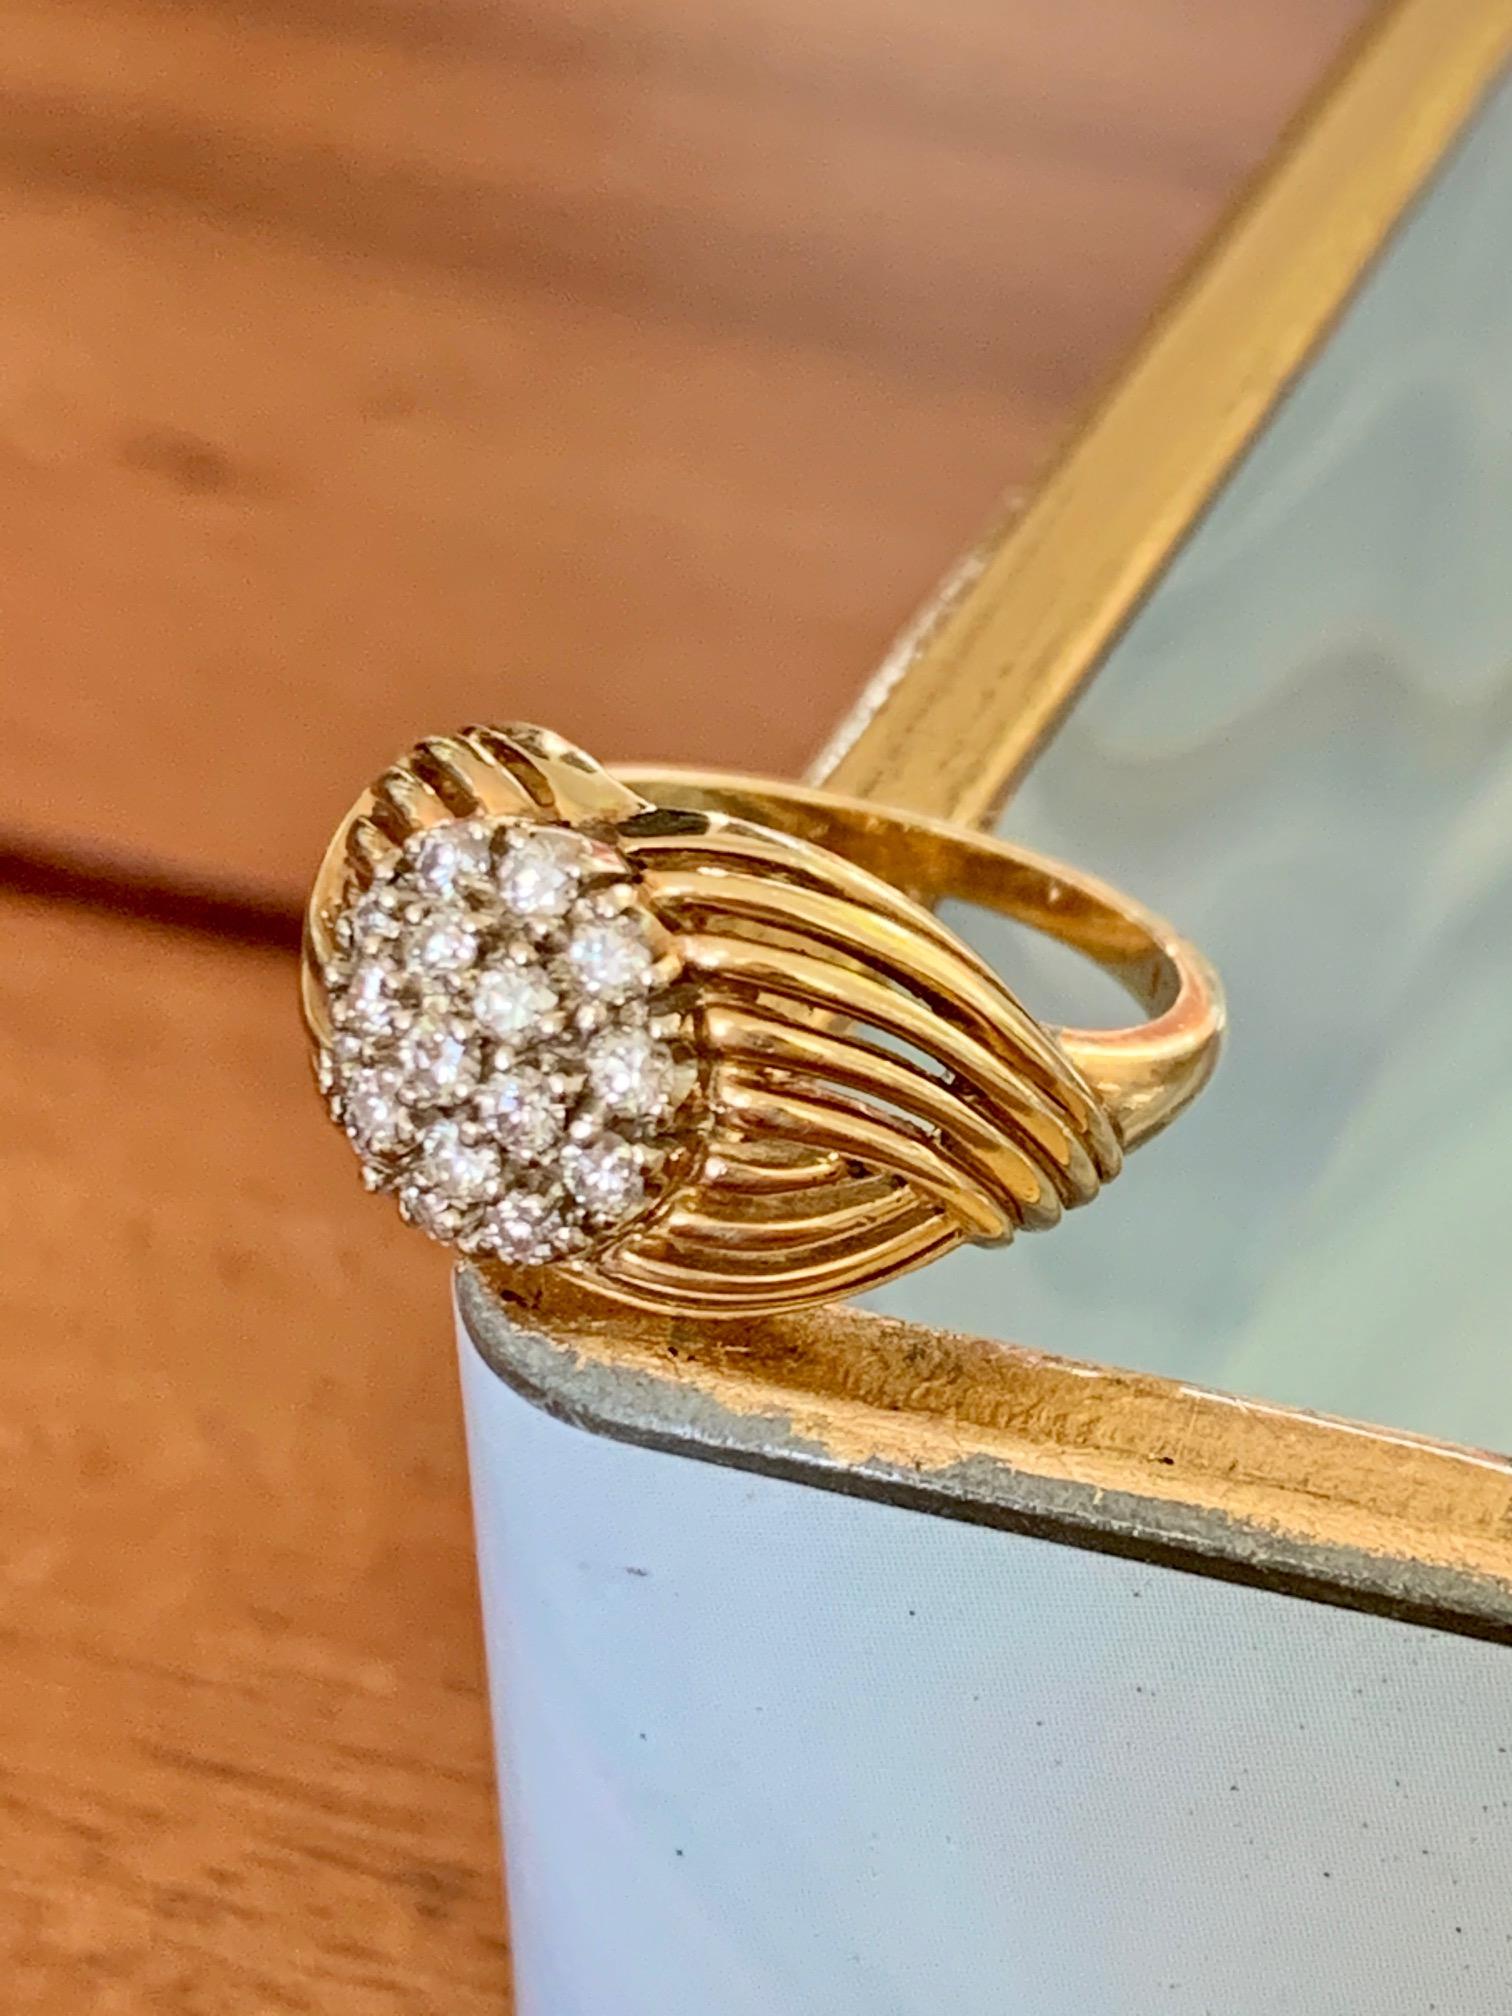 This 18 karat yellow Gold ring features seventeen 2.2mm brilliant cut Diamonds totaling approximately 1.0 tcw. 
Average clarity and color: VS-G
Size: 6
Weight: 6.2 grams